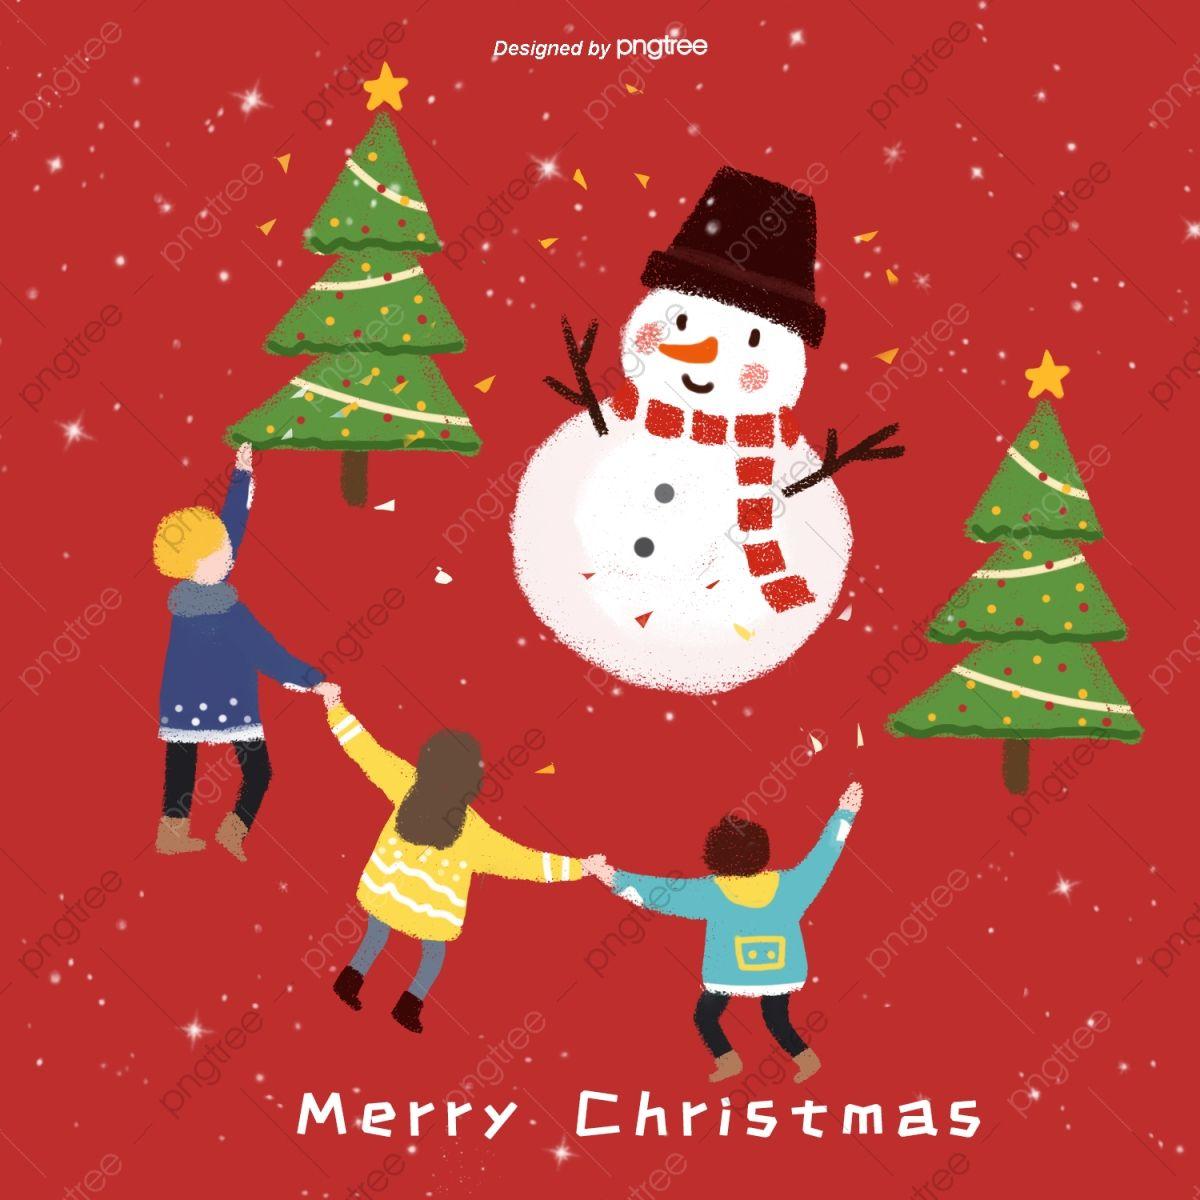 Christmas Bing Clip Art Images Free Download / Adding some heart clip ...